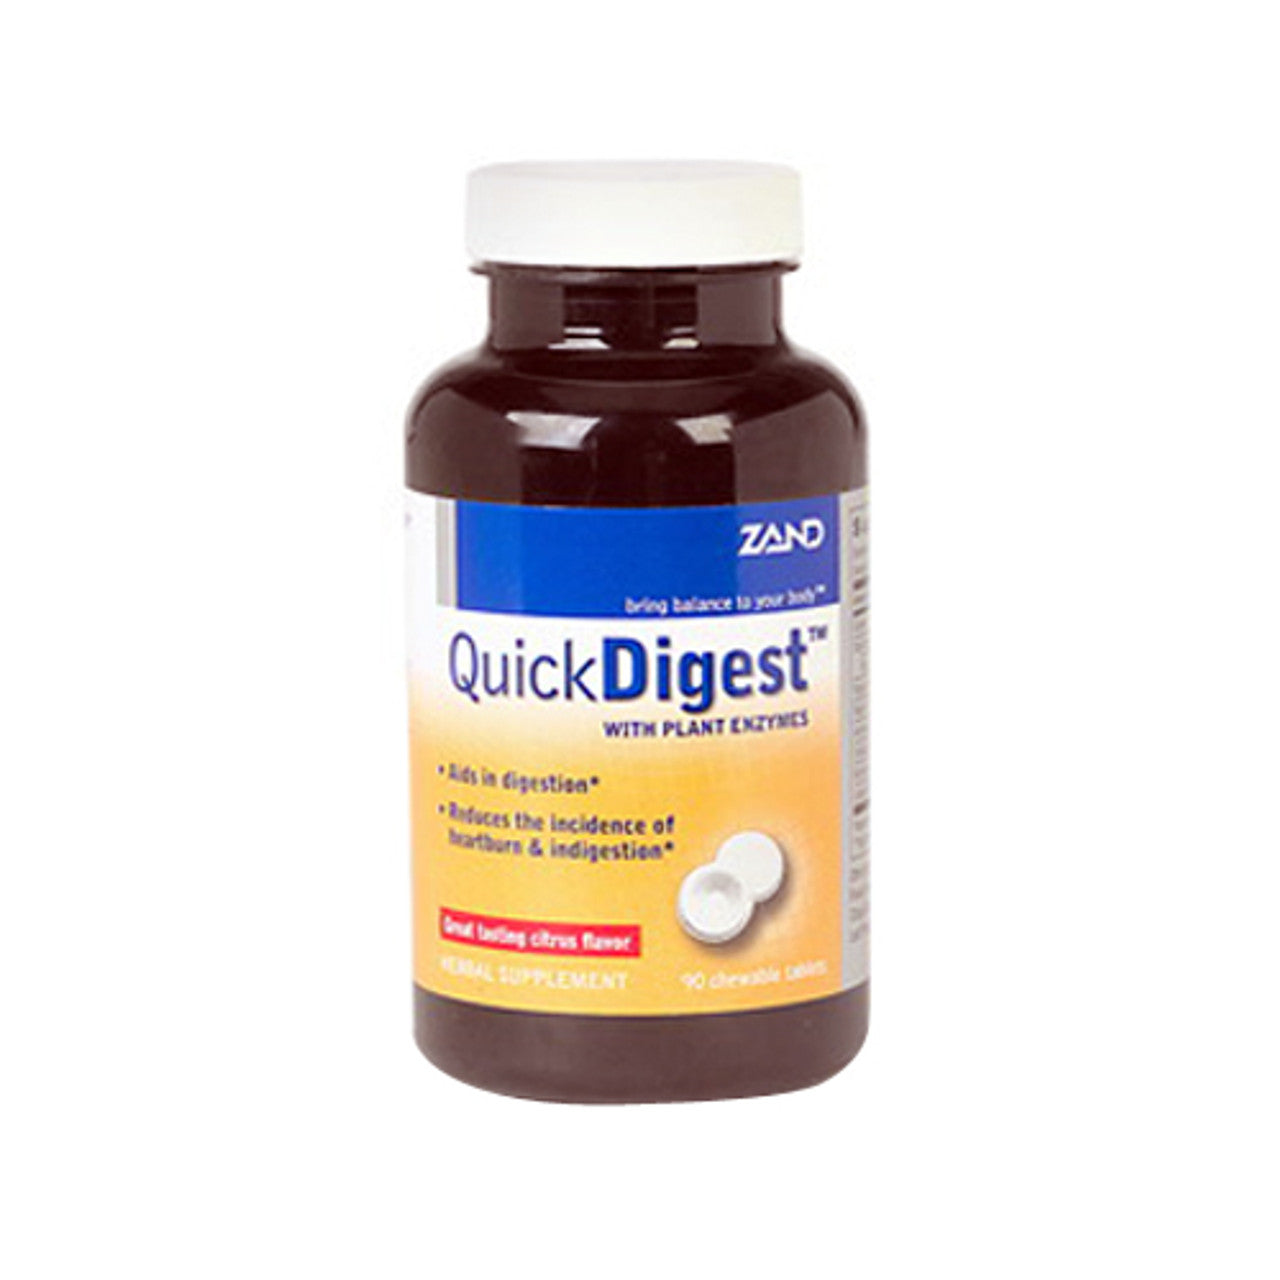 Zand Quickdigest With Plant Enzymes, Chewable Tablets - 90 Ea